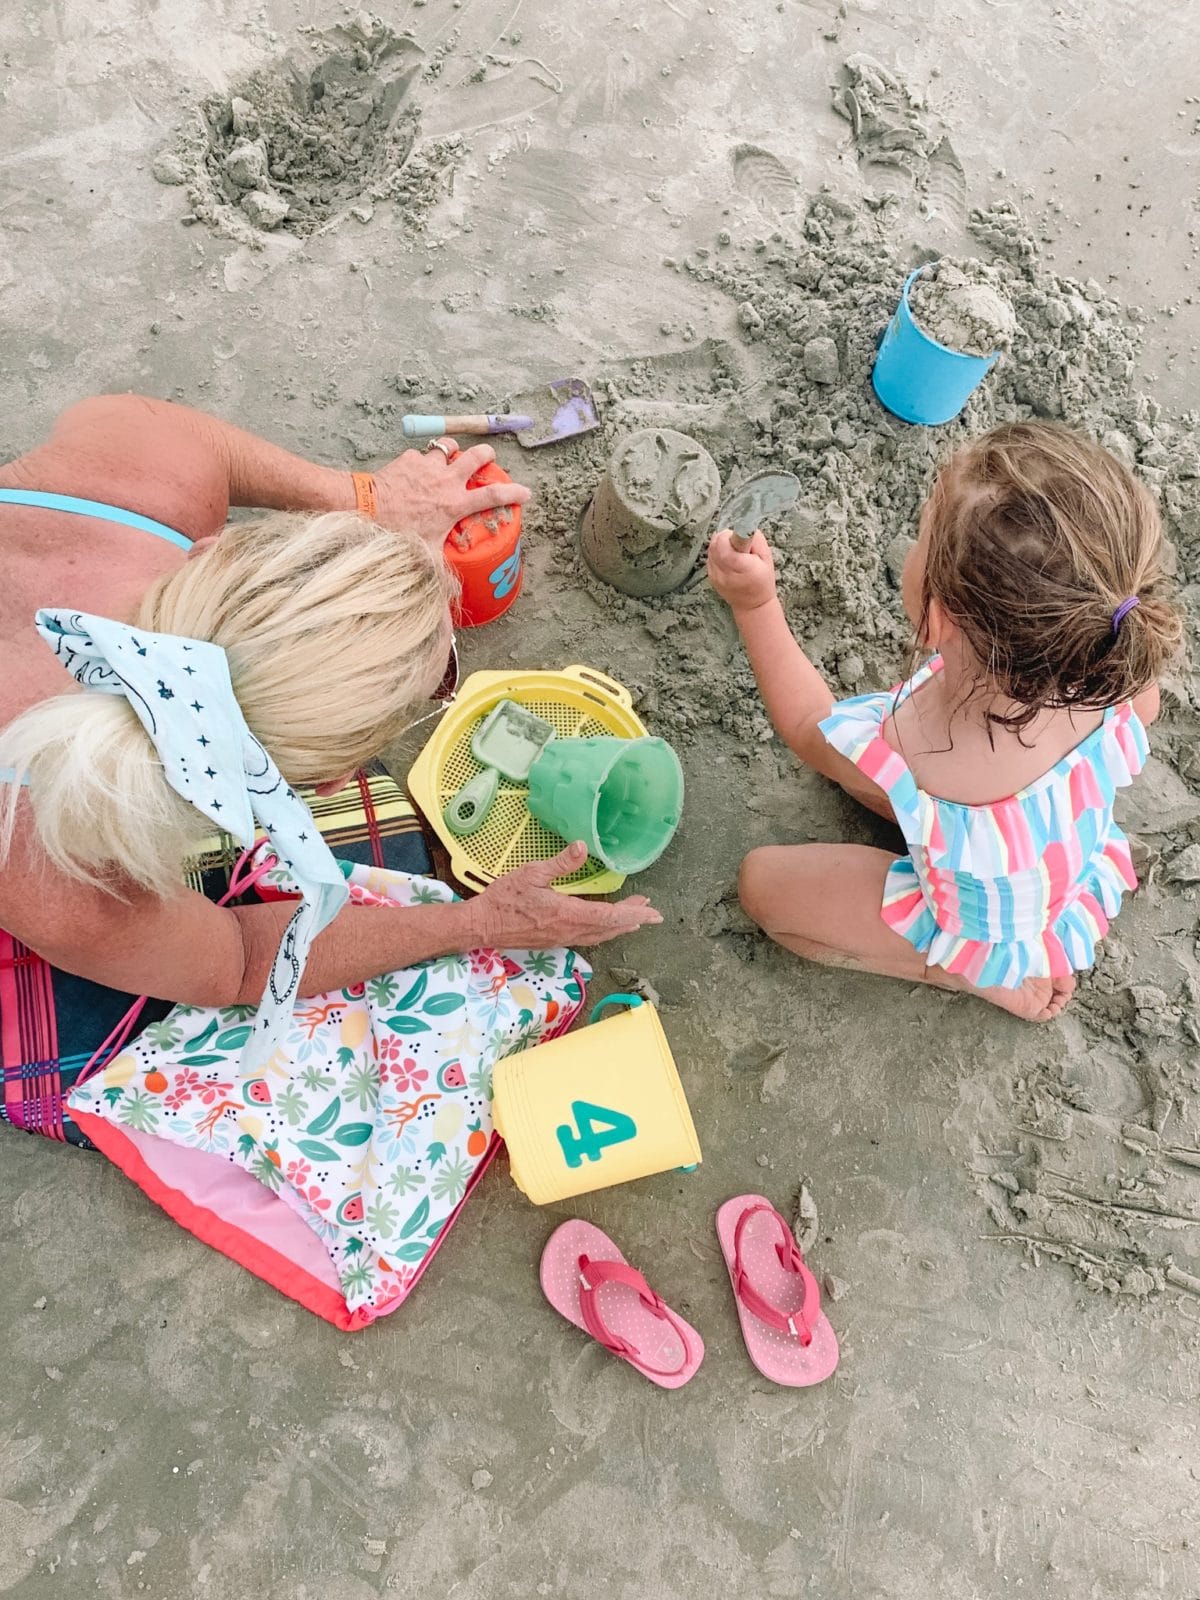 48 Hours in Galveston - Grandma and Granddaughter playing in the sand 